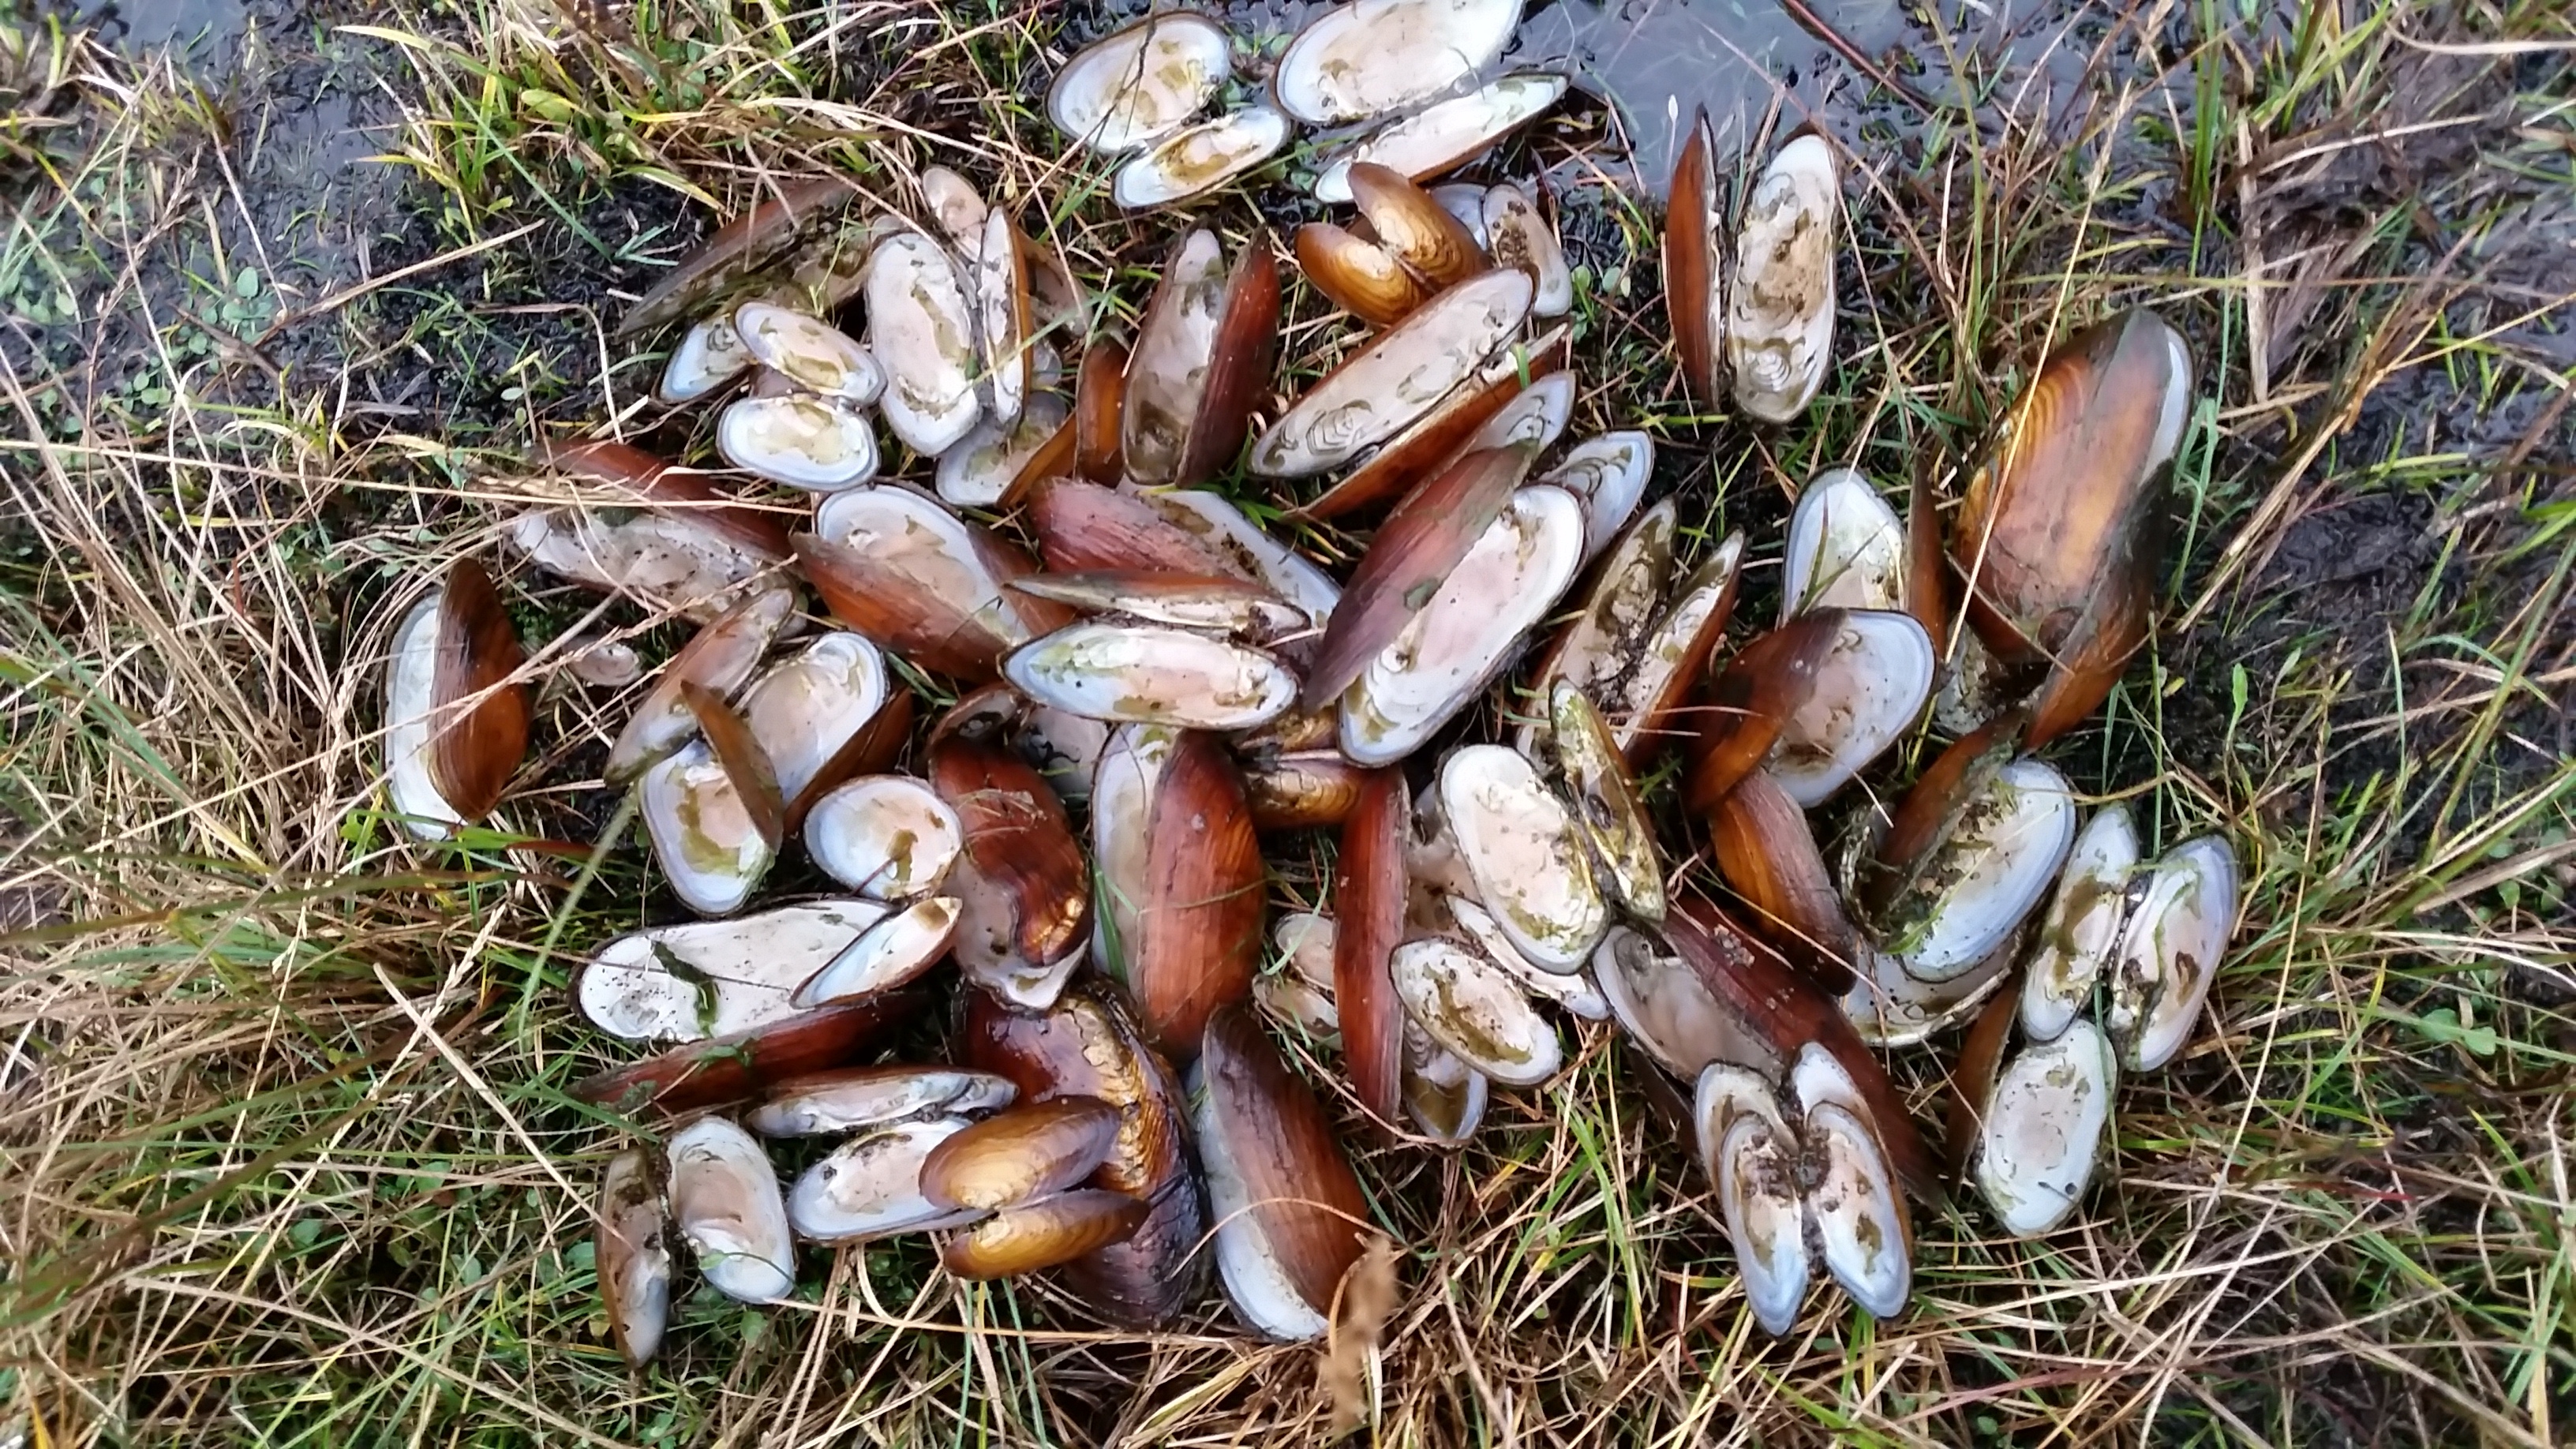 The mussels were discovered near a river south of Lochinver